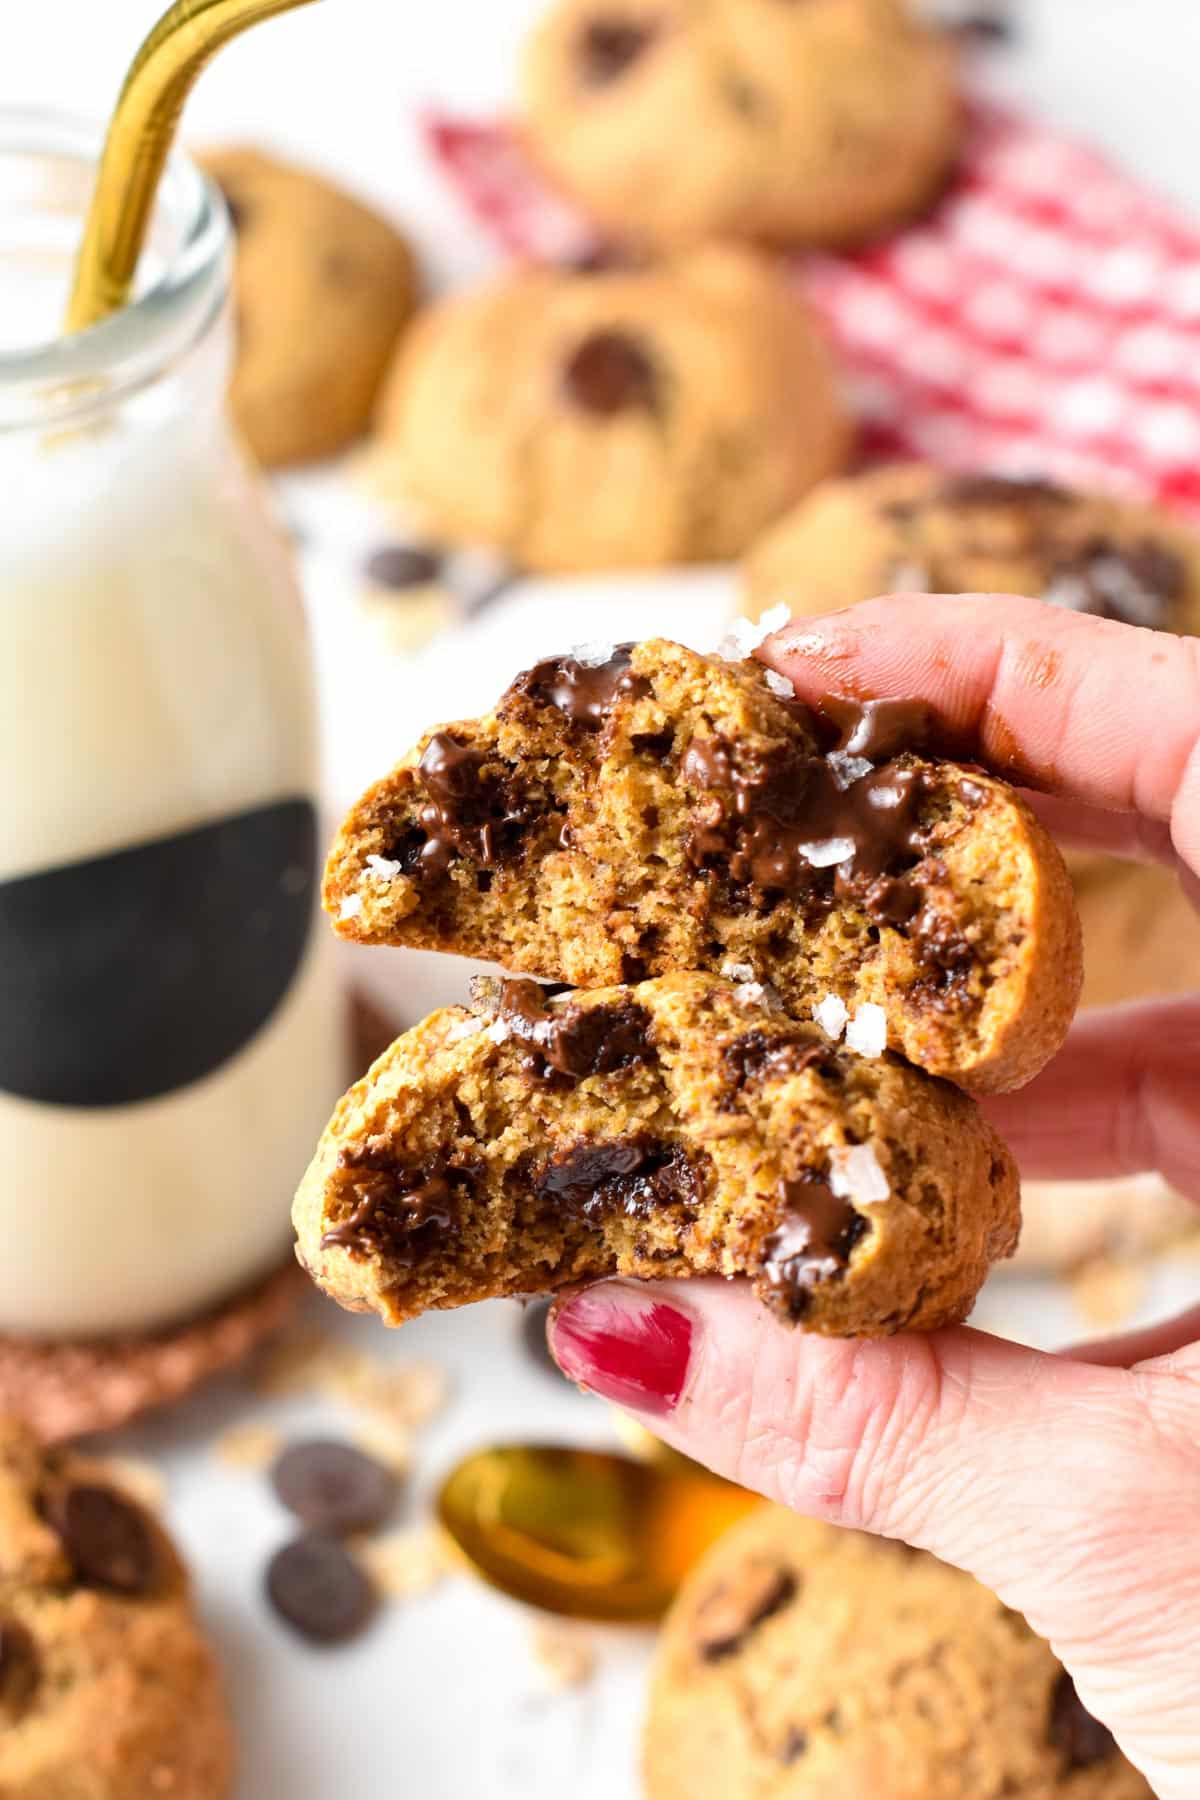 These cottage cheese cookies are delicious melt-in-your-mouth chocolate chip cookies packed with 5 g of proteins and nutrients. Plus, these cookies with cottage cheese are also naturally gluten-free, low-sugar and oil-free.